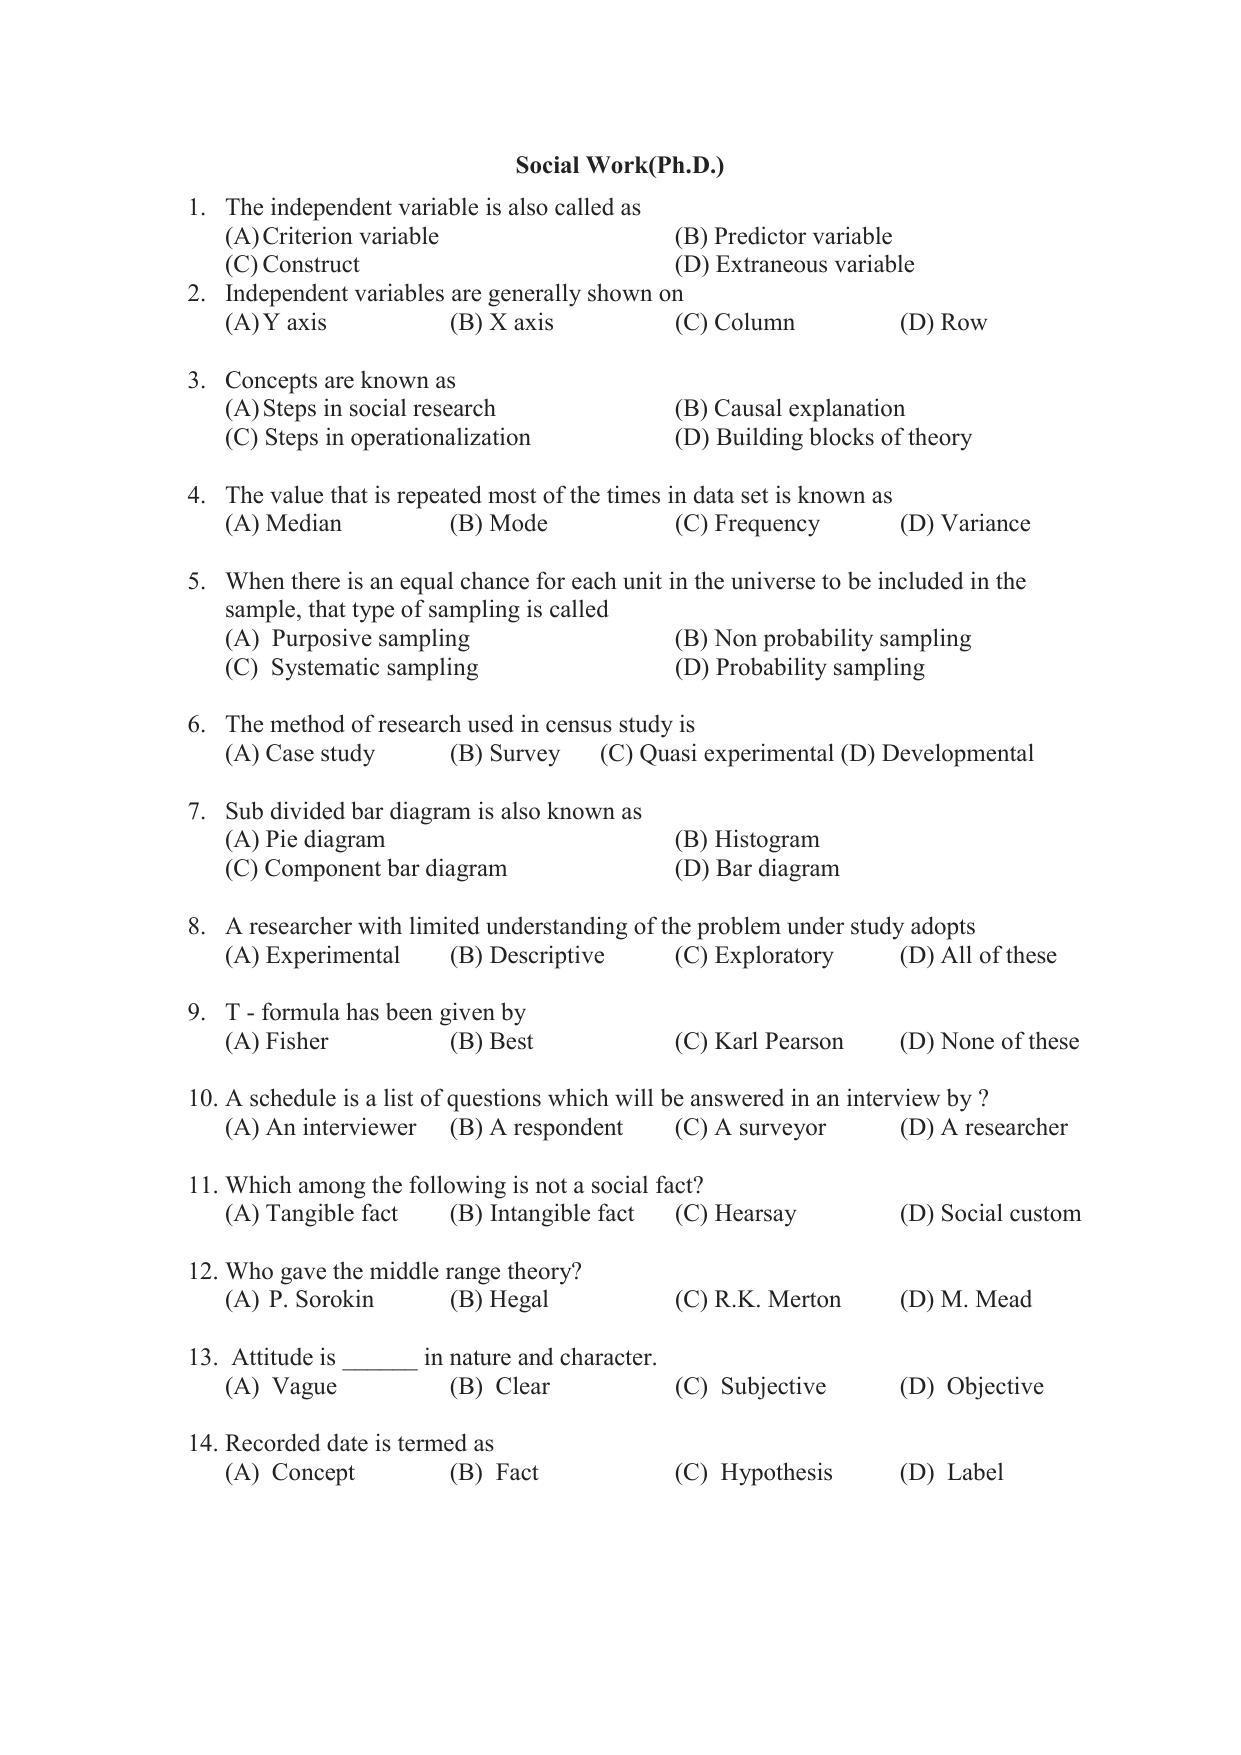 PU MPET Ancient Indian History & Archeology 2022 Question Papers - Page 58